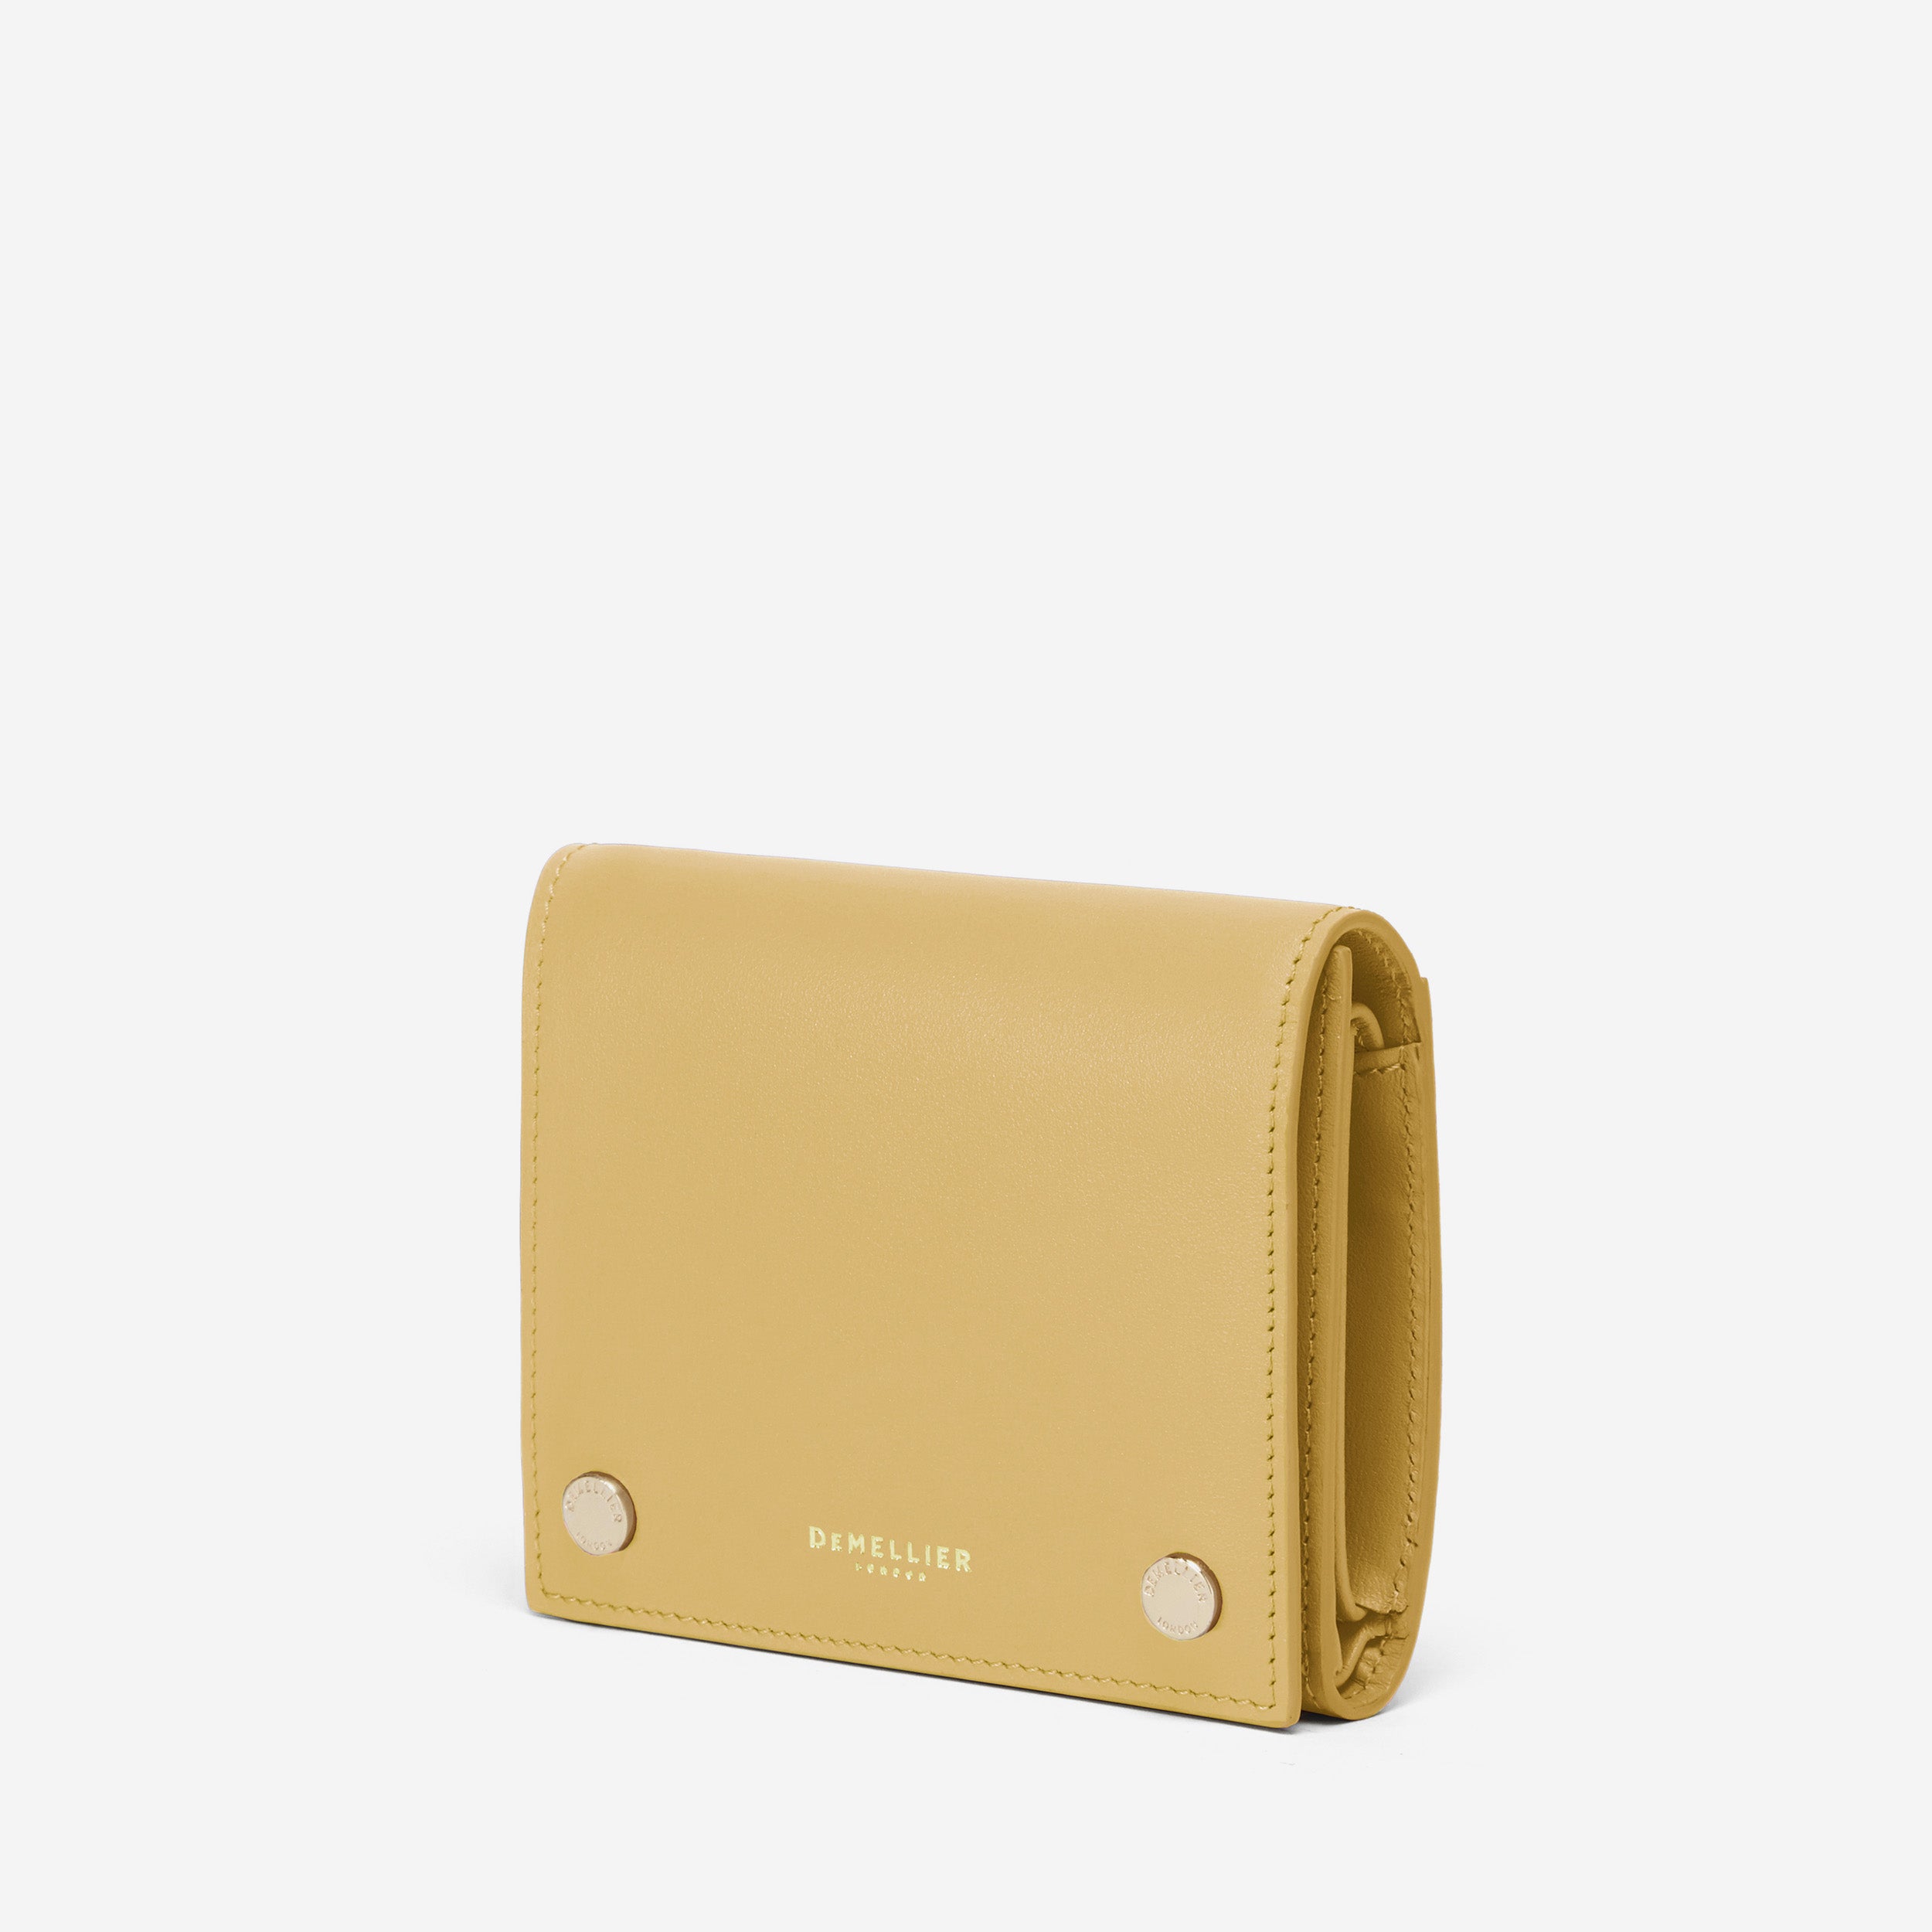 Small Leather Goods - New In | DeMellier | Shop now